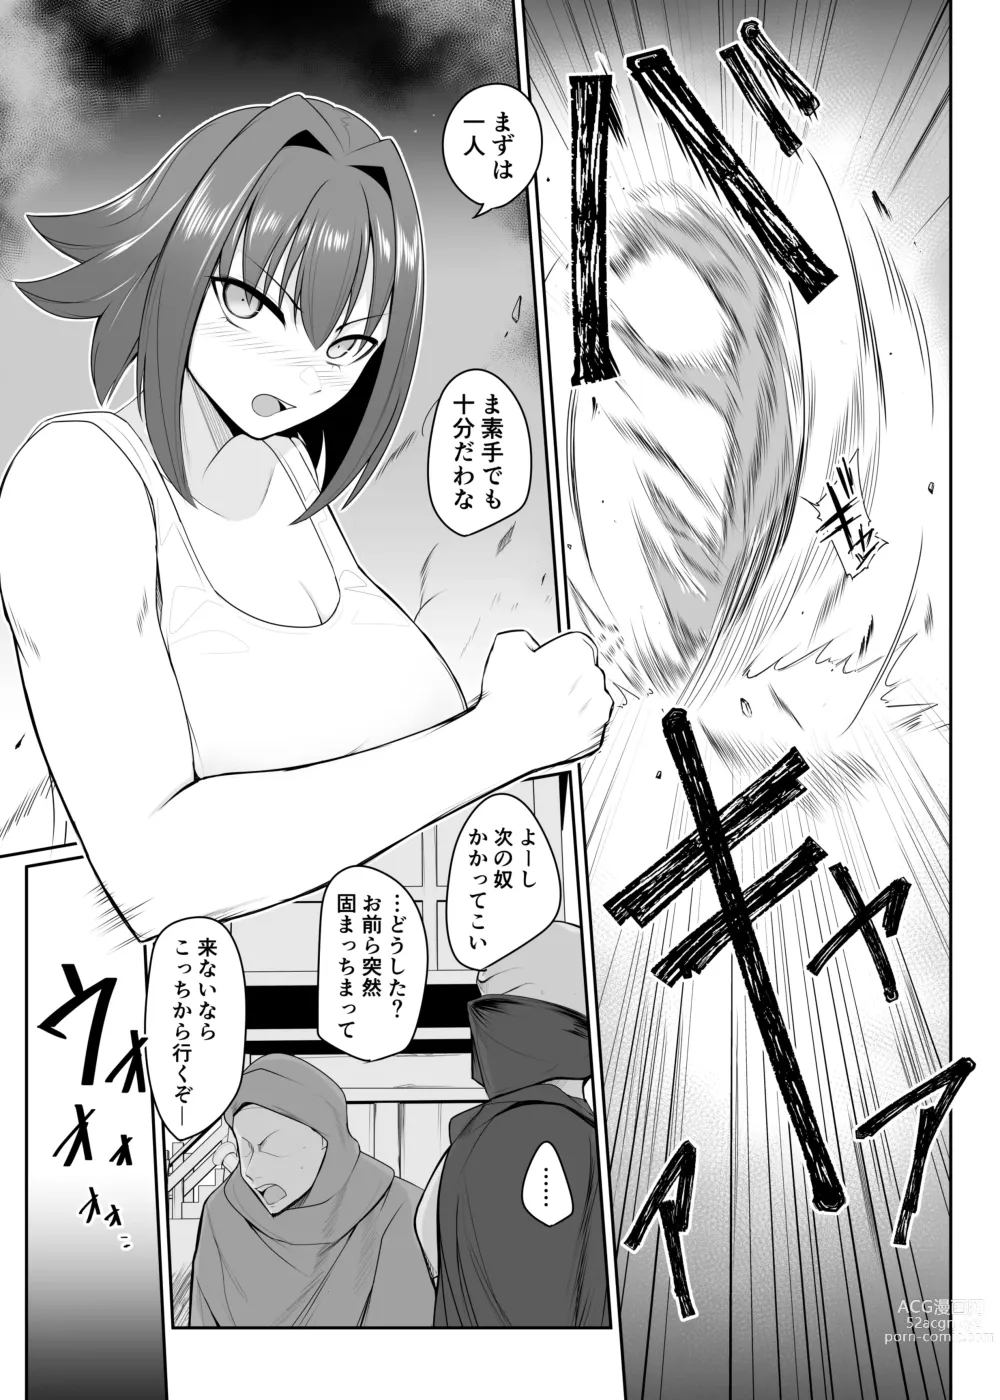 Page 9 of doujinshi Doll Turning Collar - Female Warrior